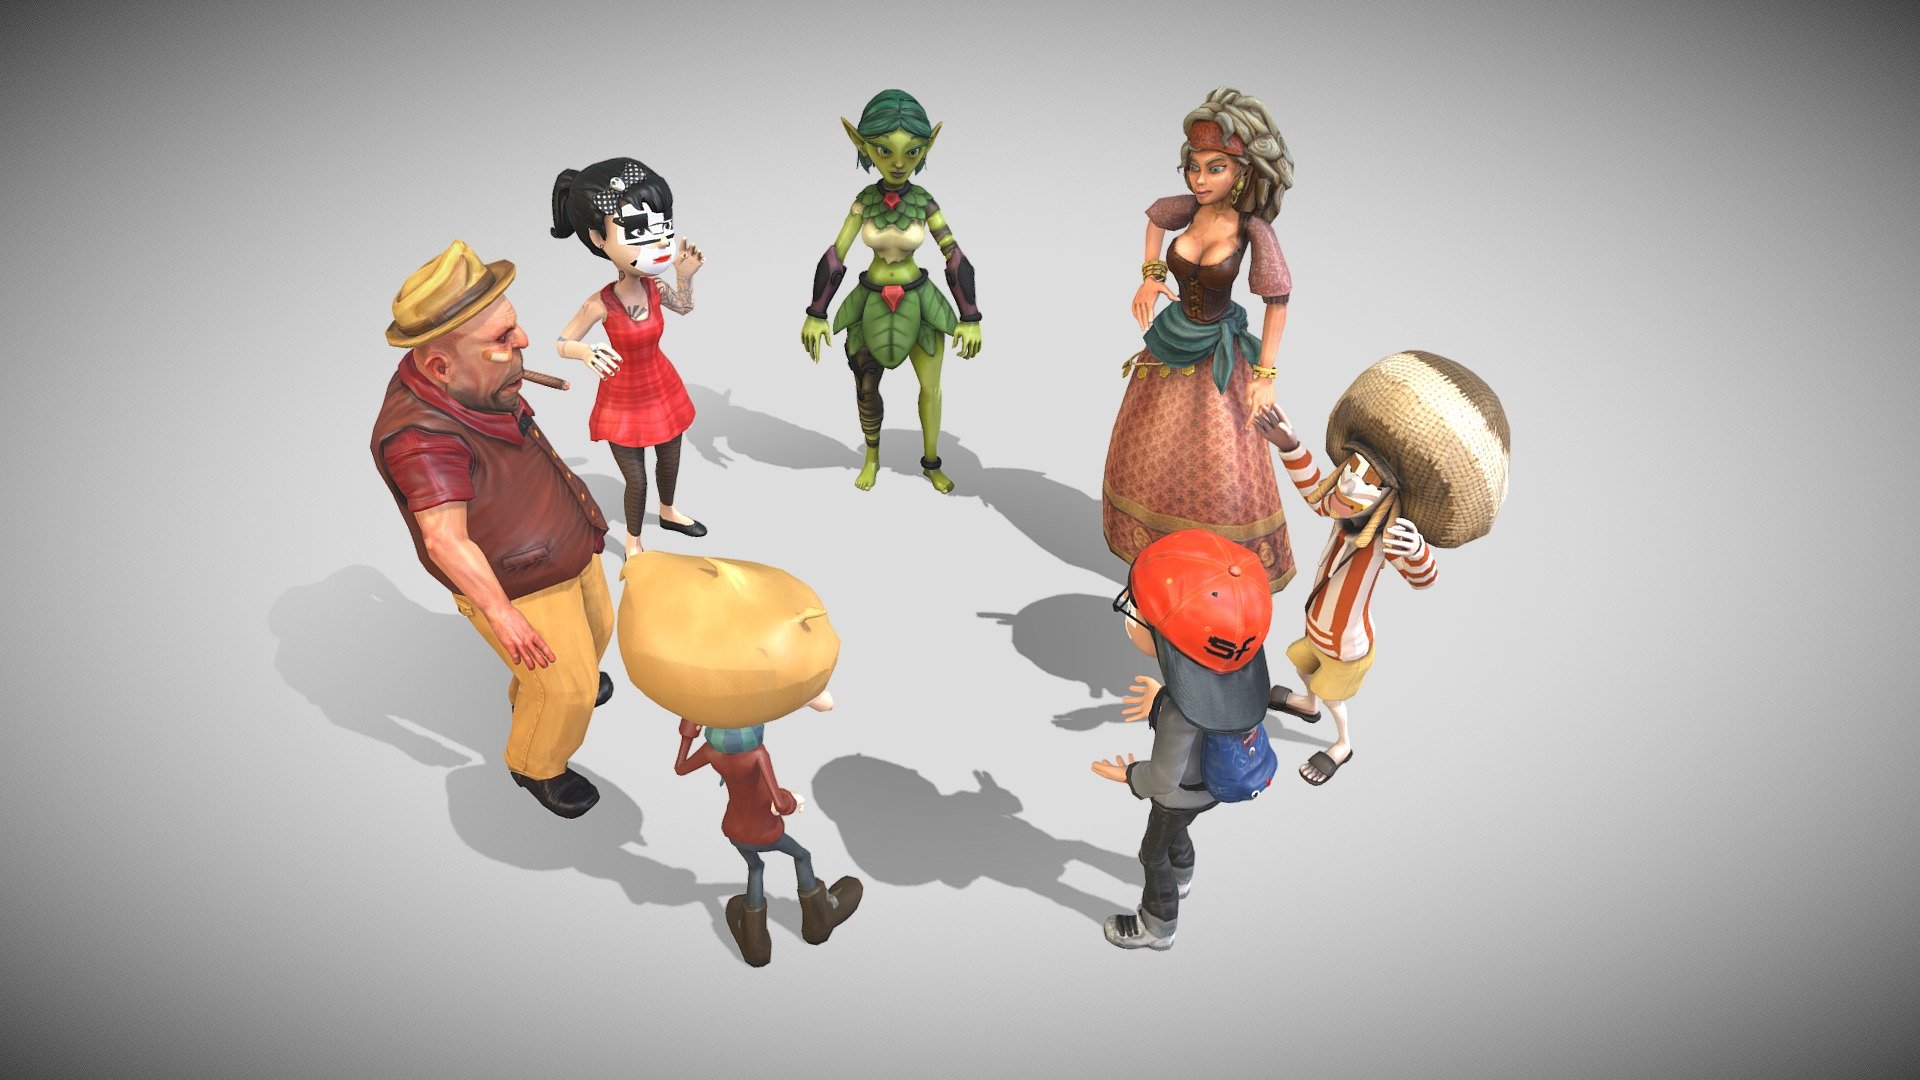 Seven cartoon characters in discussion circle in this looping animation at 30 frames per second.

See this 3D model in action, and more models like it, in this collection of free augmented reality apps:

https://morpheusar.com/ - Group Seven Animated Cartoon Characters Talking - 3D model by LasquetiSpice 3d model